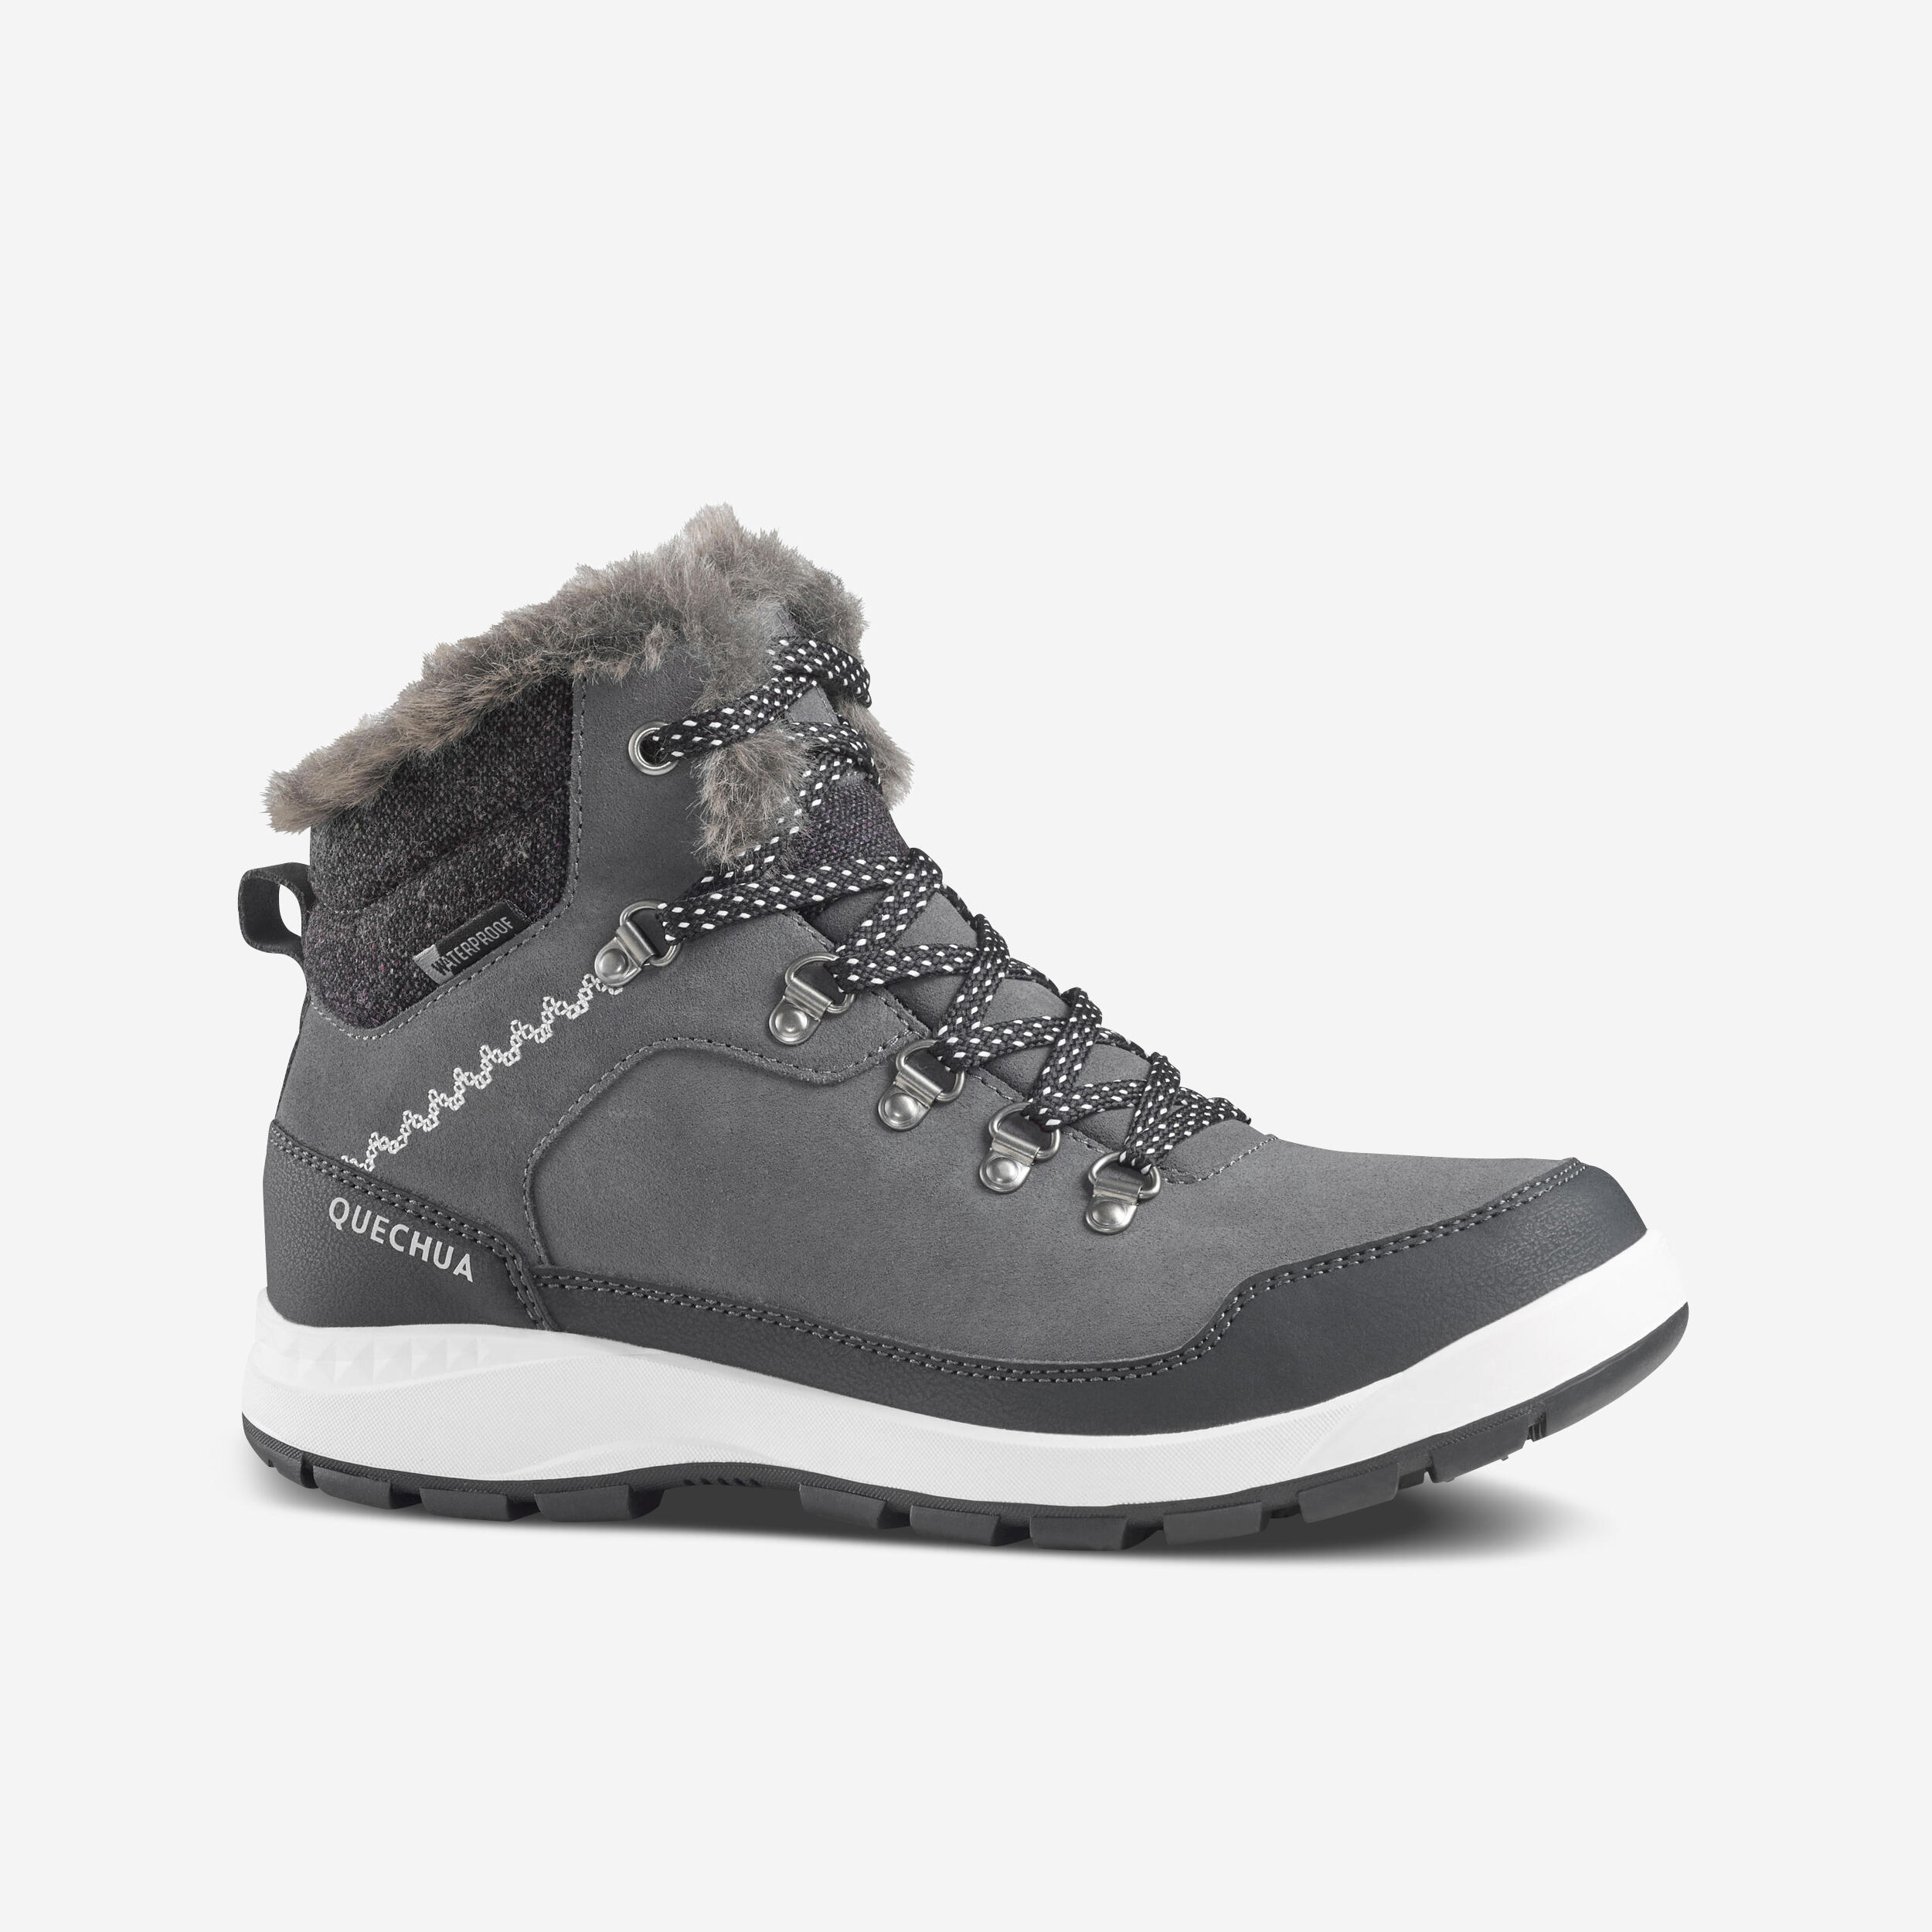 Image of Women’s Winter Boots - SH 900 Mid Grey